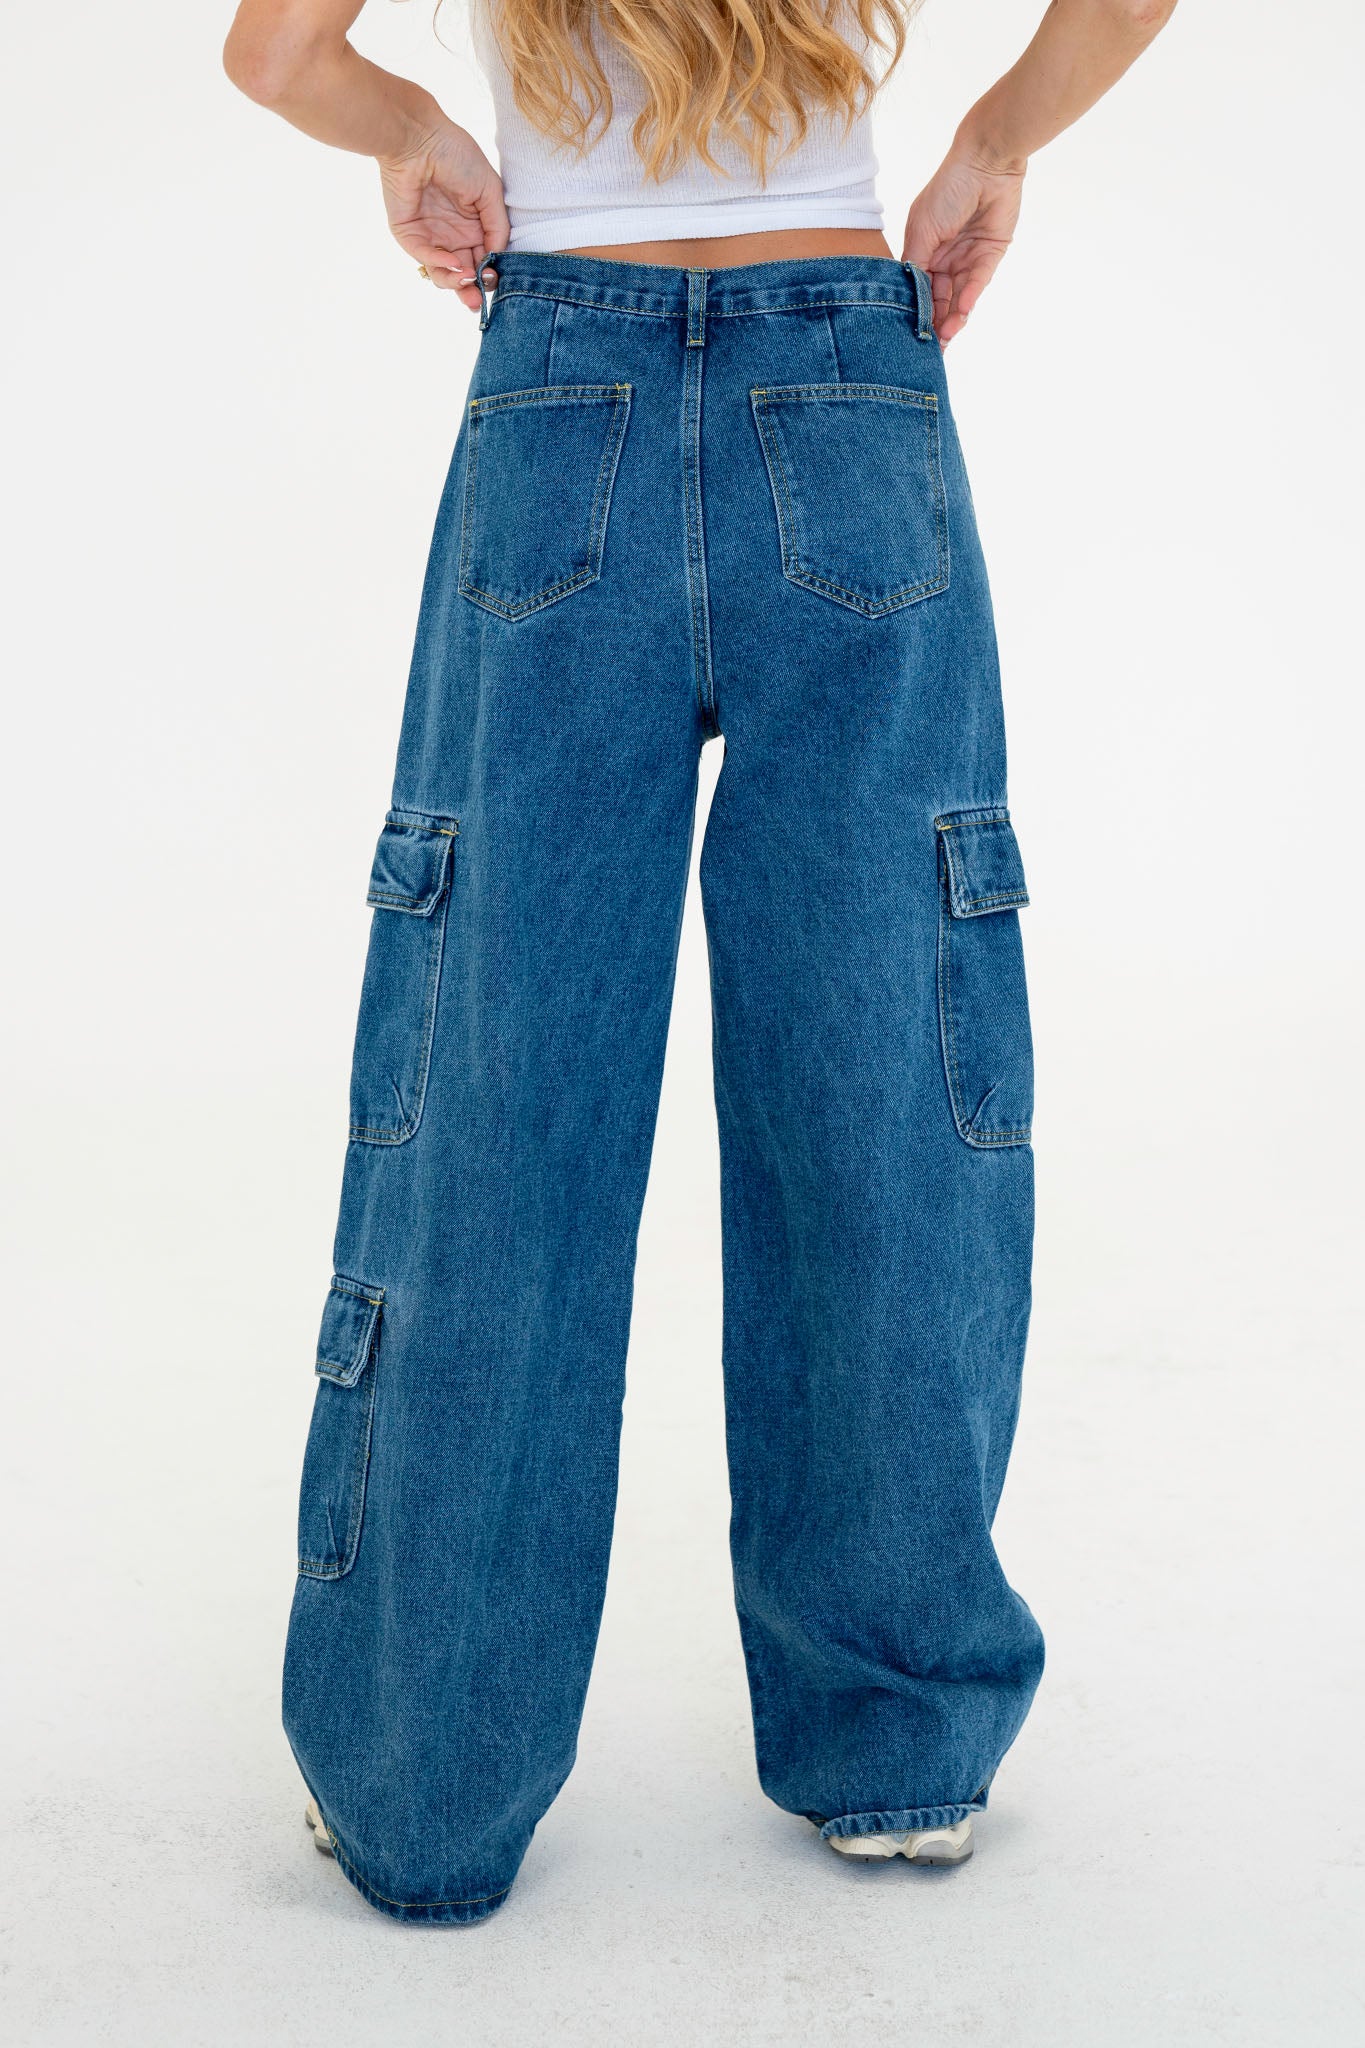 View 3 of Wide Leg Cargo Denim Pants, a Jeans from Larrea Cove. Detail: .